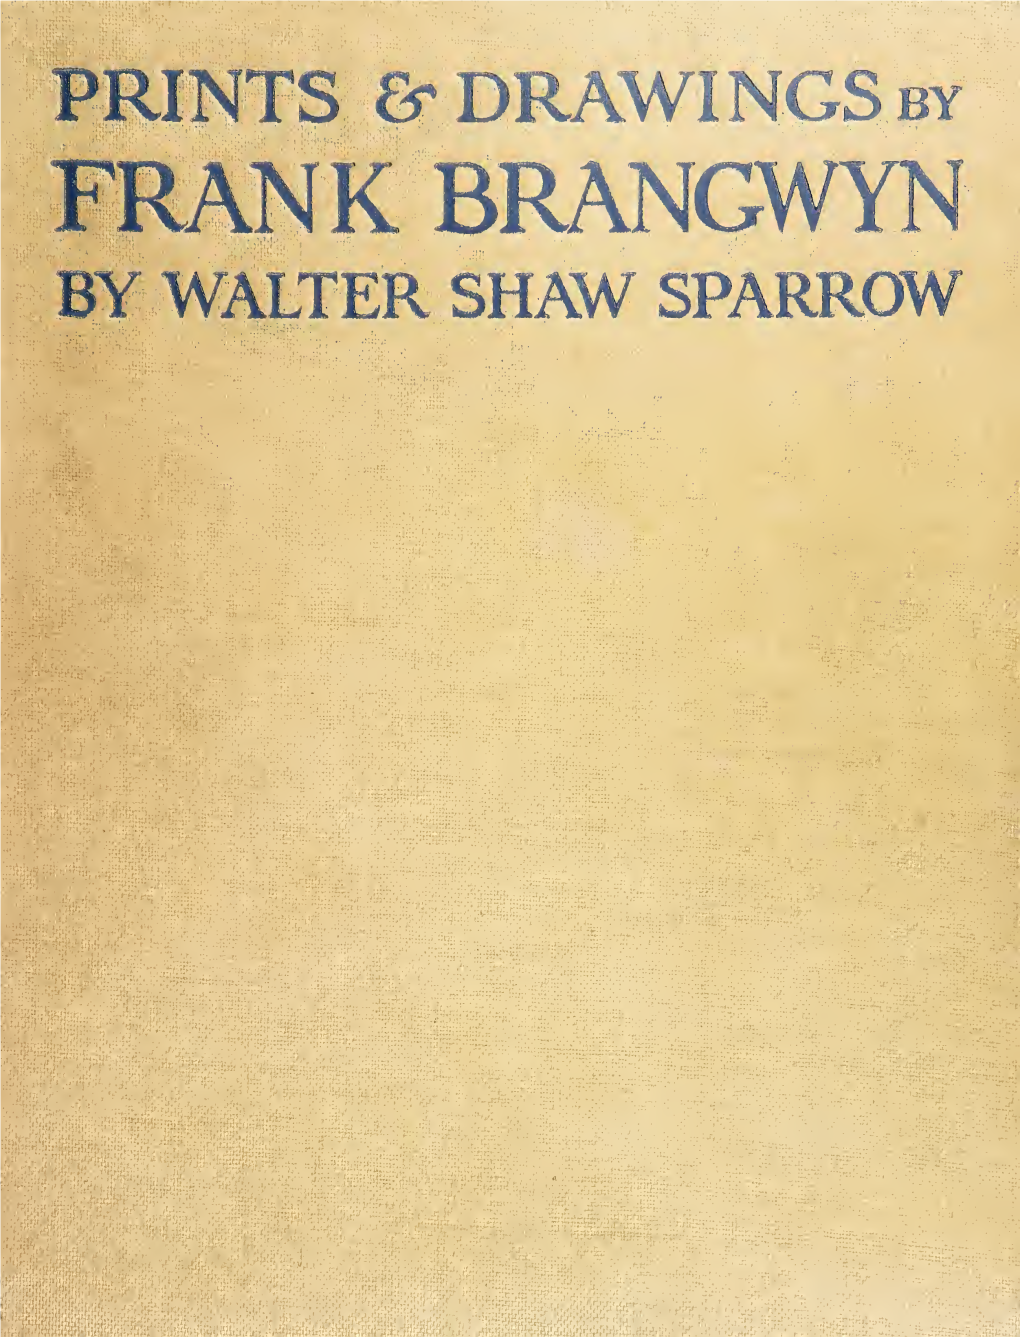 Drawings by Frank Brangwyn, with Some Other Phases of His